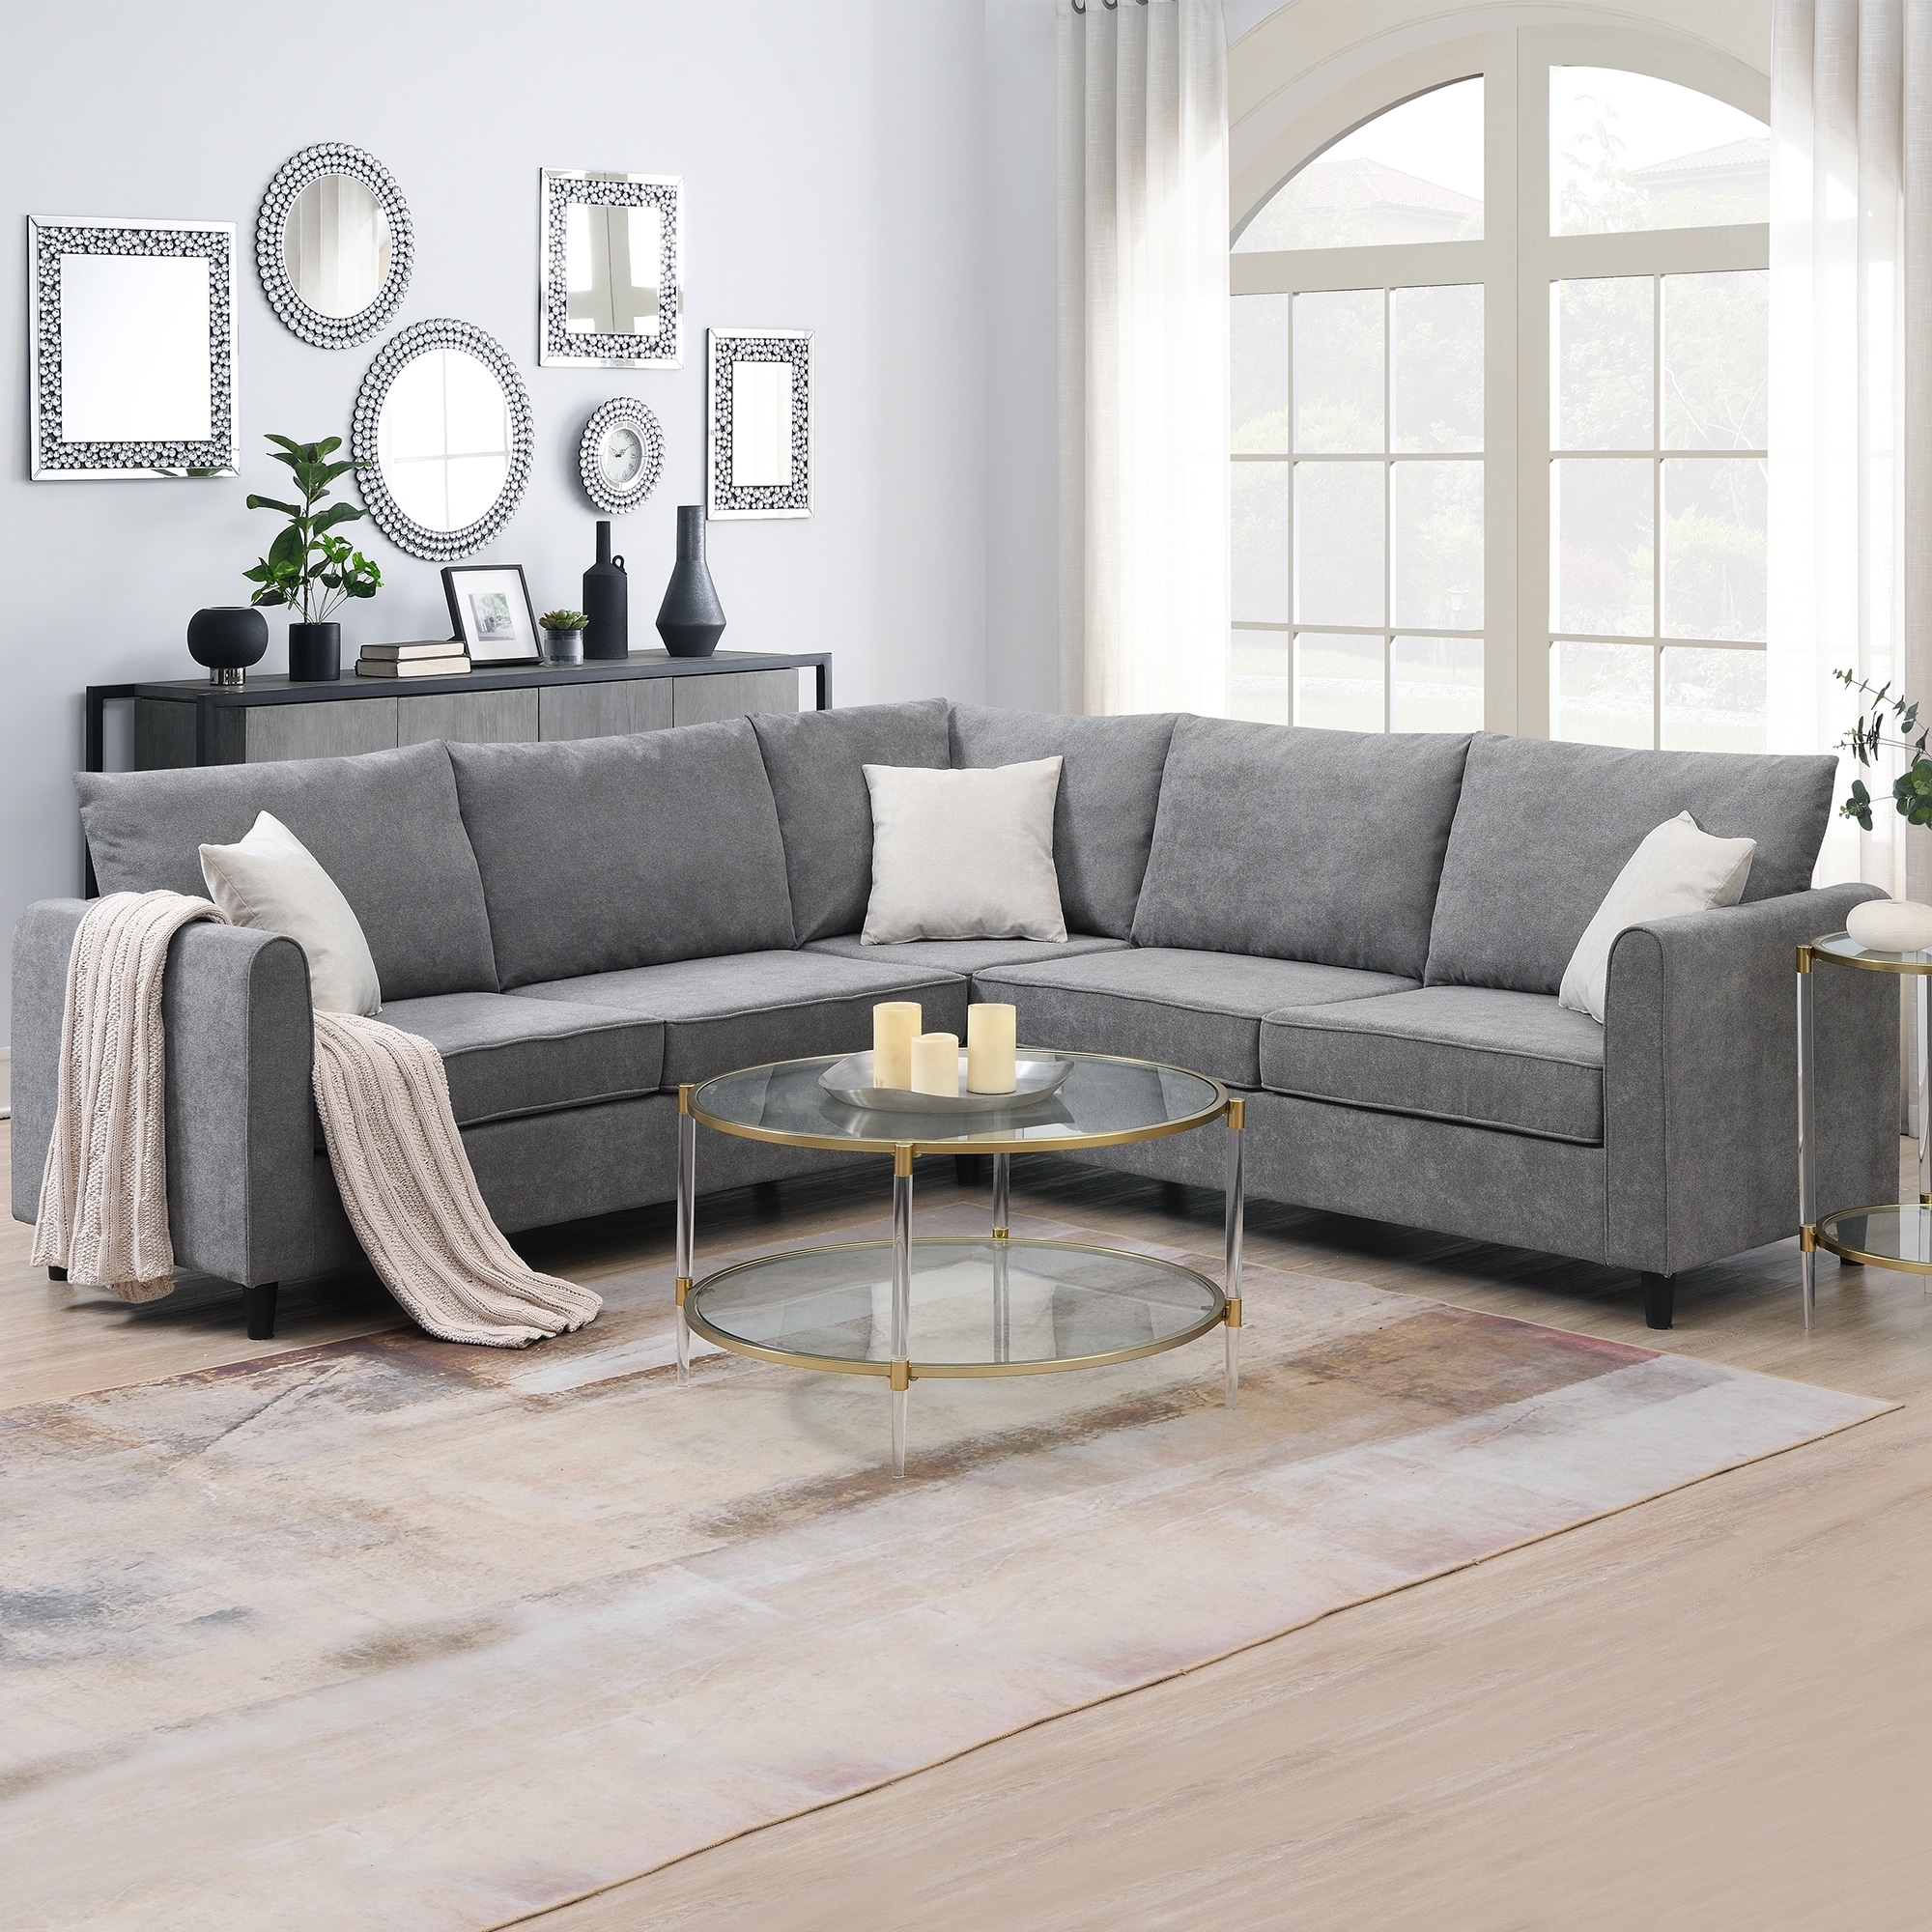 Rustic, On Sale Sectional Sofas - Bed Bath & Beyond